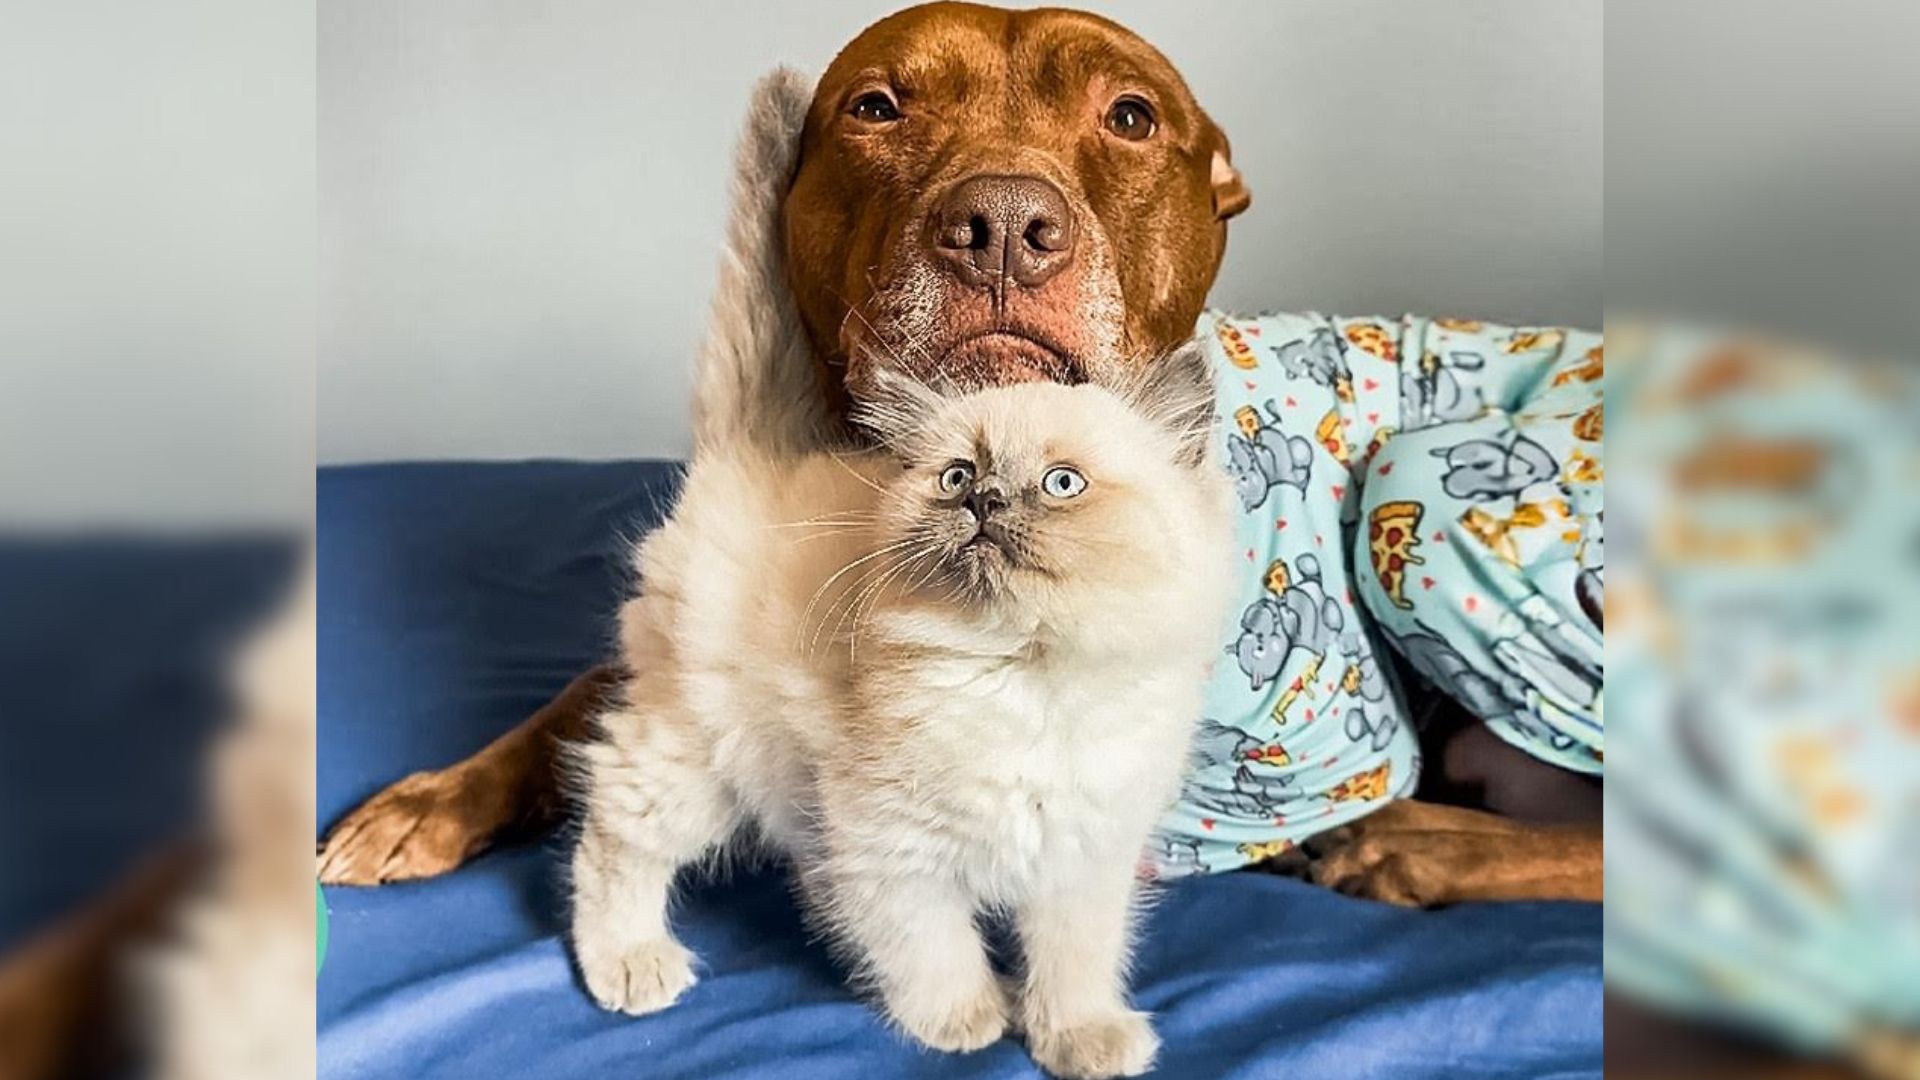 Sweet Pittie Who Doesn’t Like Other Dogs Meets A New Feline Friend Who Changes His Life